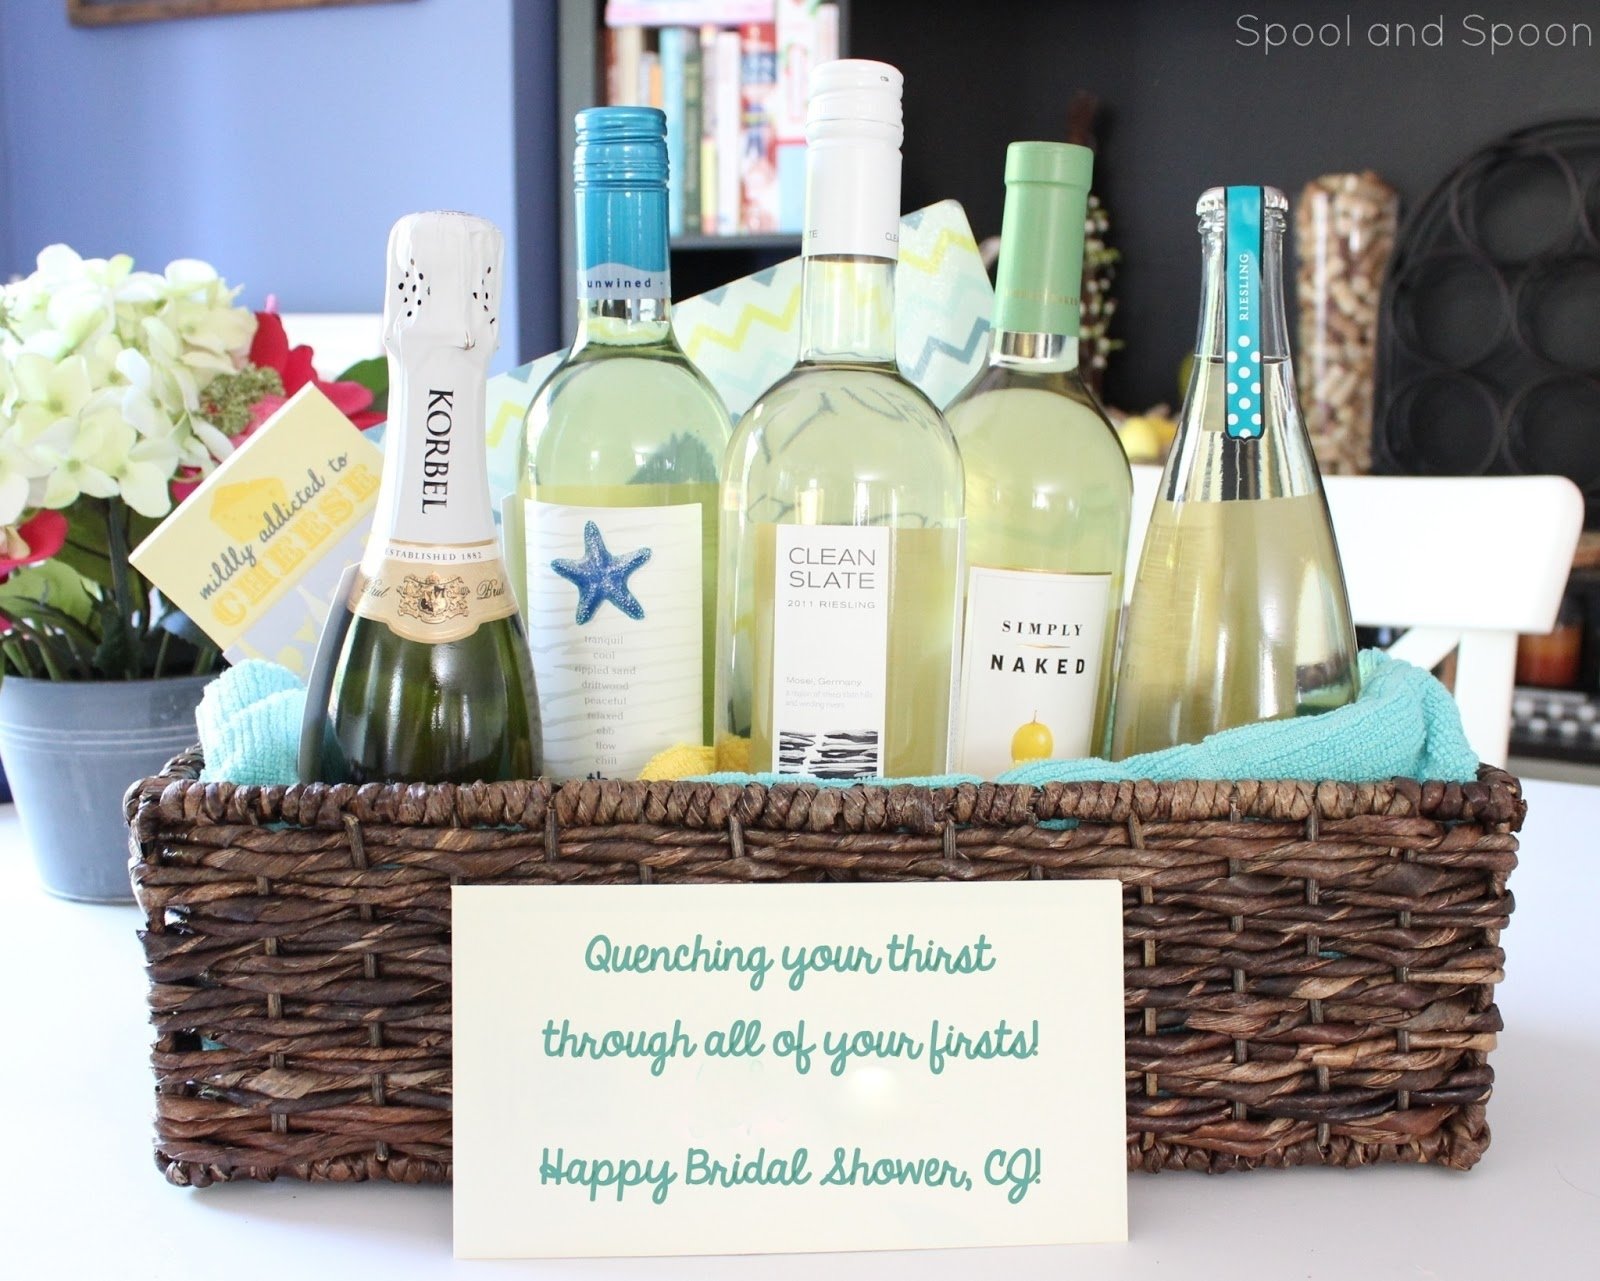 10 Ideal Bridal Shower Gift Basket Ideas spool and spoon all of your firsts wine gift basket with tags 2022